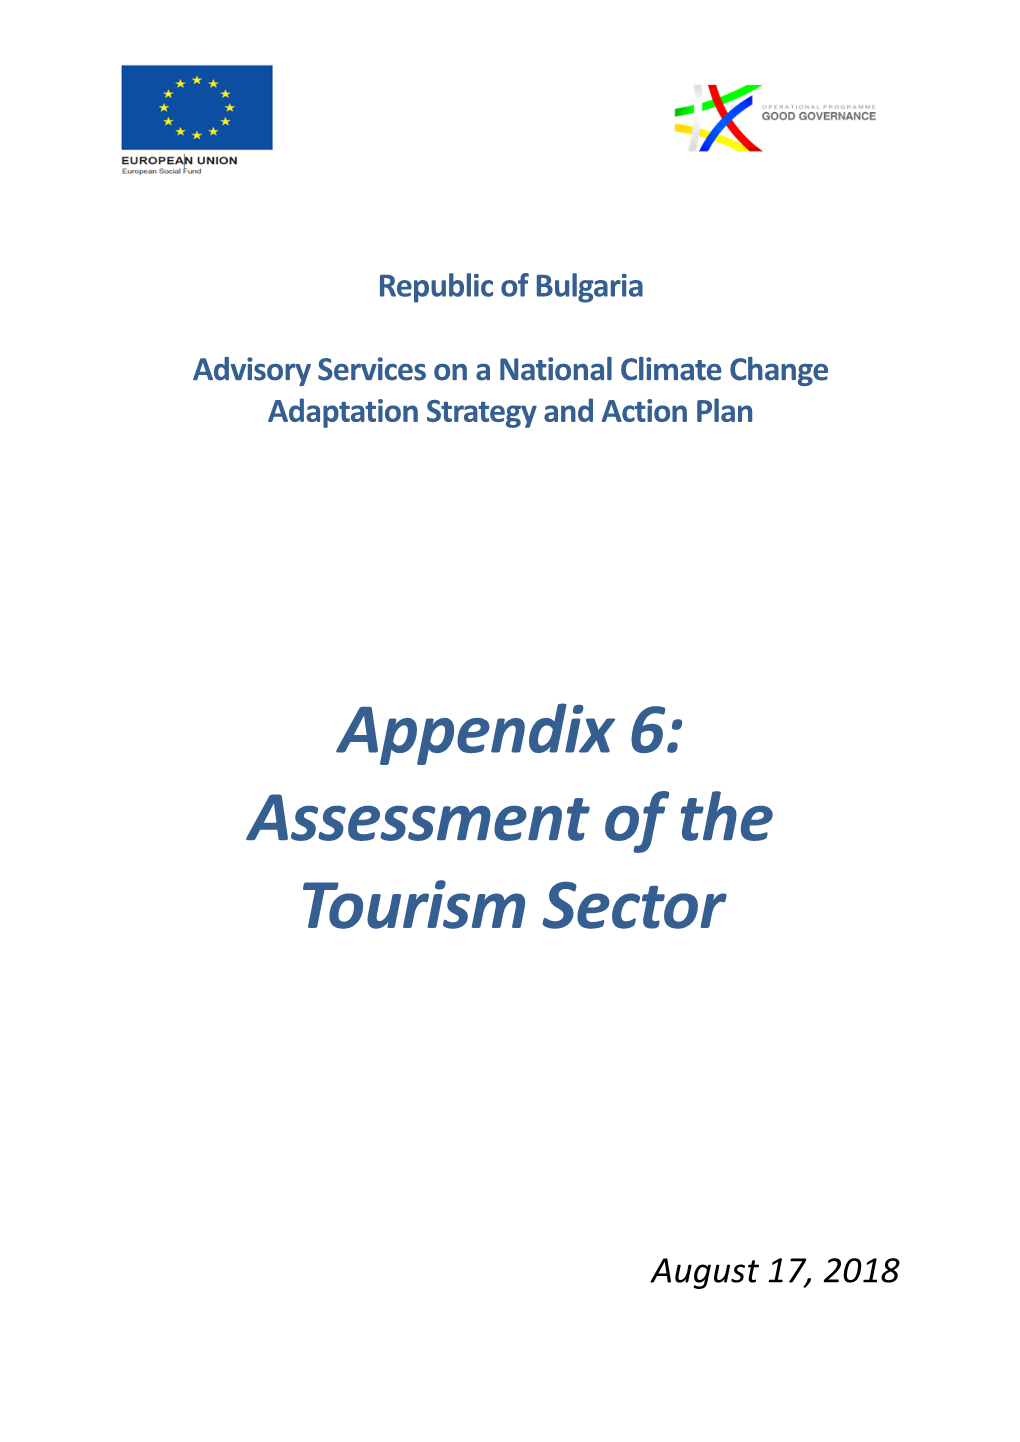 Appendix 6: Assessment of the Tourism Sector